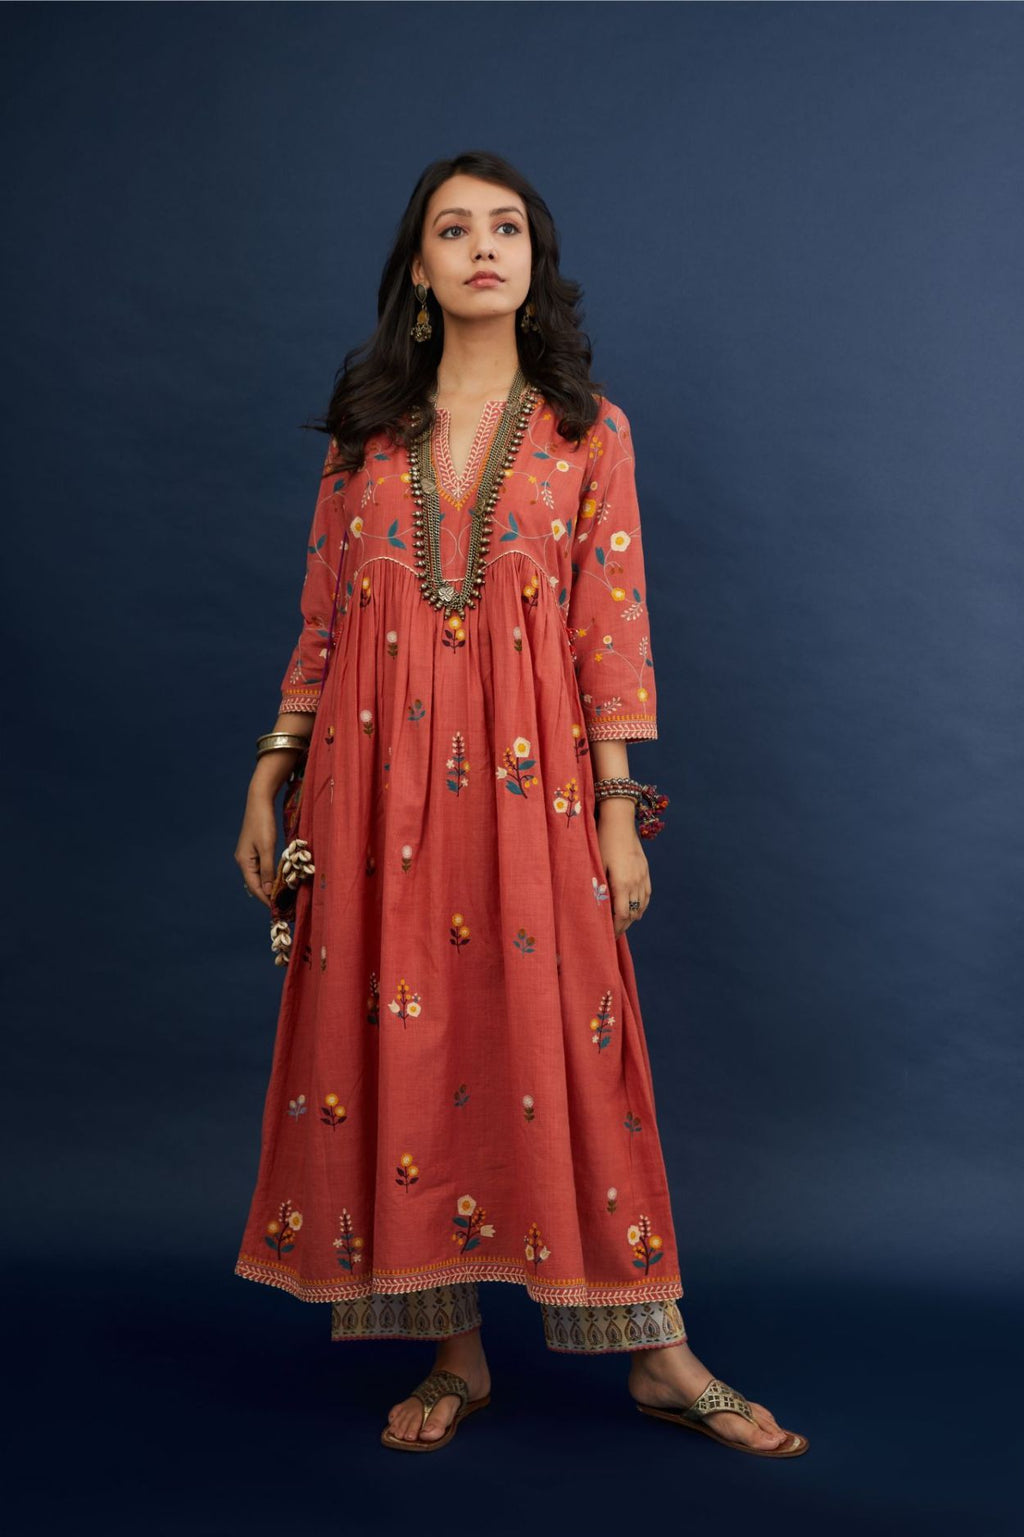 Handspun hand-woven cotton kurta with wavy empire waistline and gathers, highlighted with all-over multi colored thread embroidery, paired with Hand block printed cotton pants with ric-rac detailing at hem